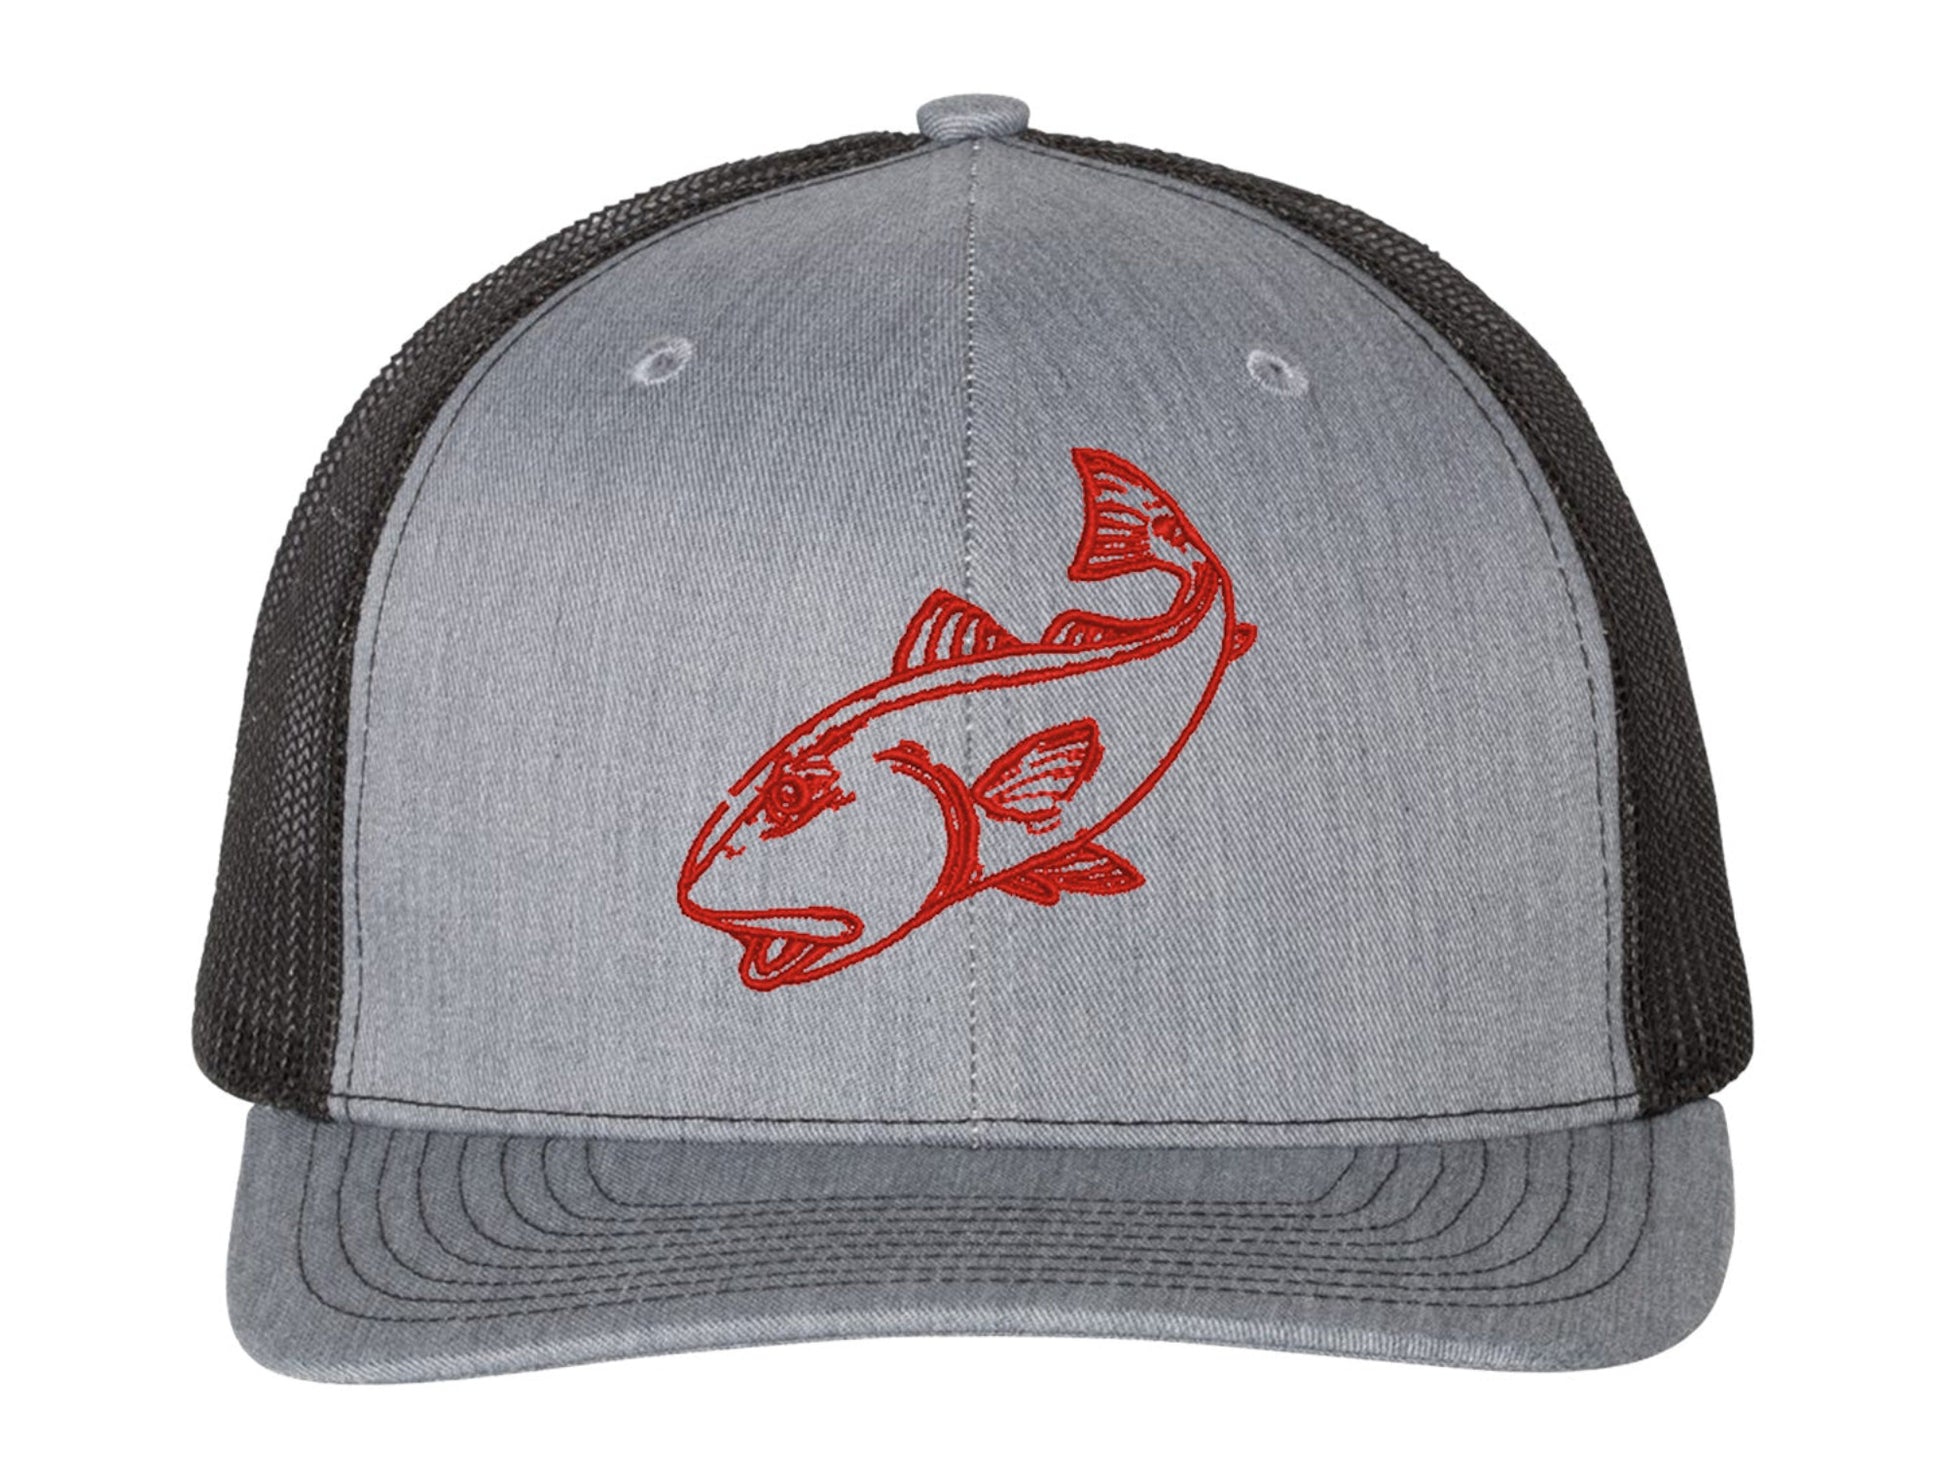 Redfish Fishing Trucker Snapback Hats by Reel Fishy Apparel -*9 Colors! Hthr Gray/Red